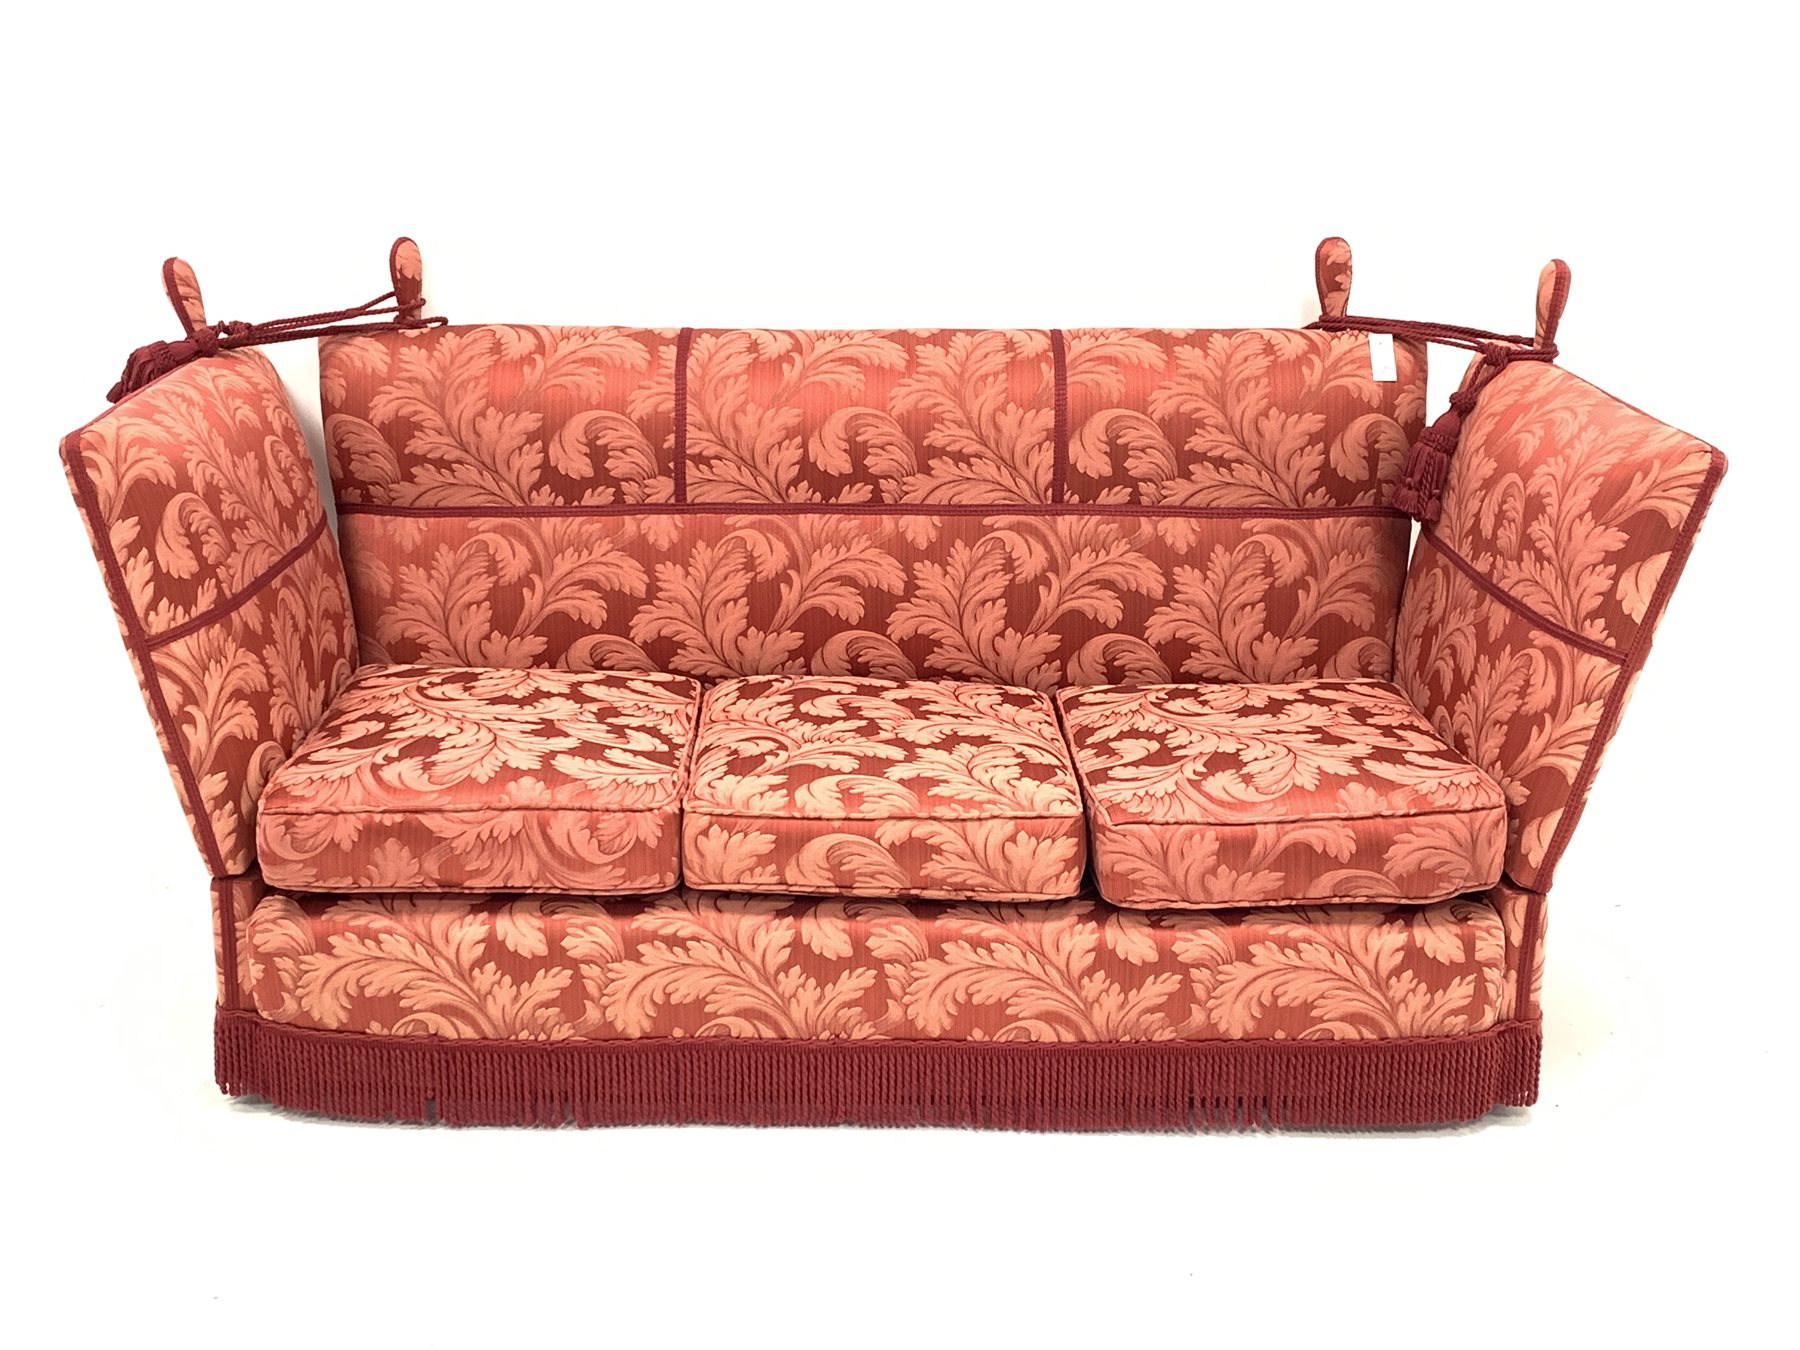 drop end sofa beds for sale